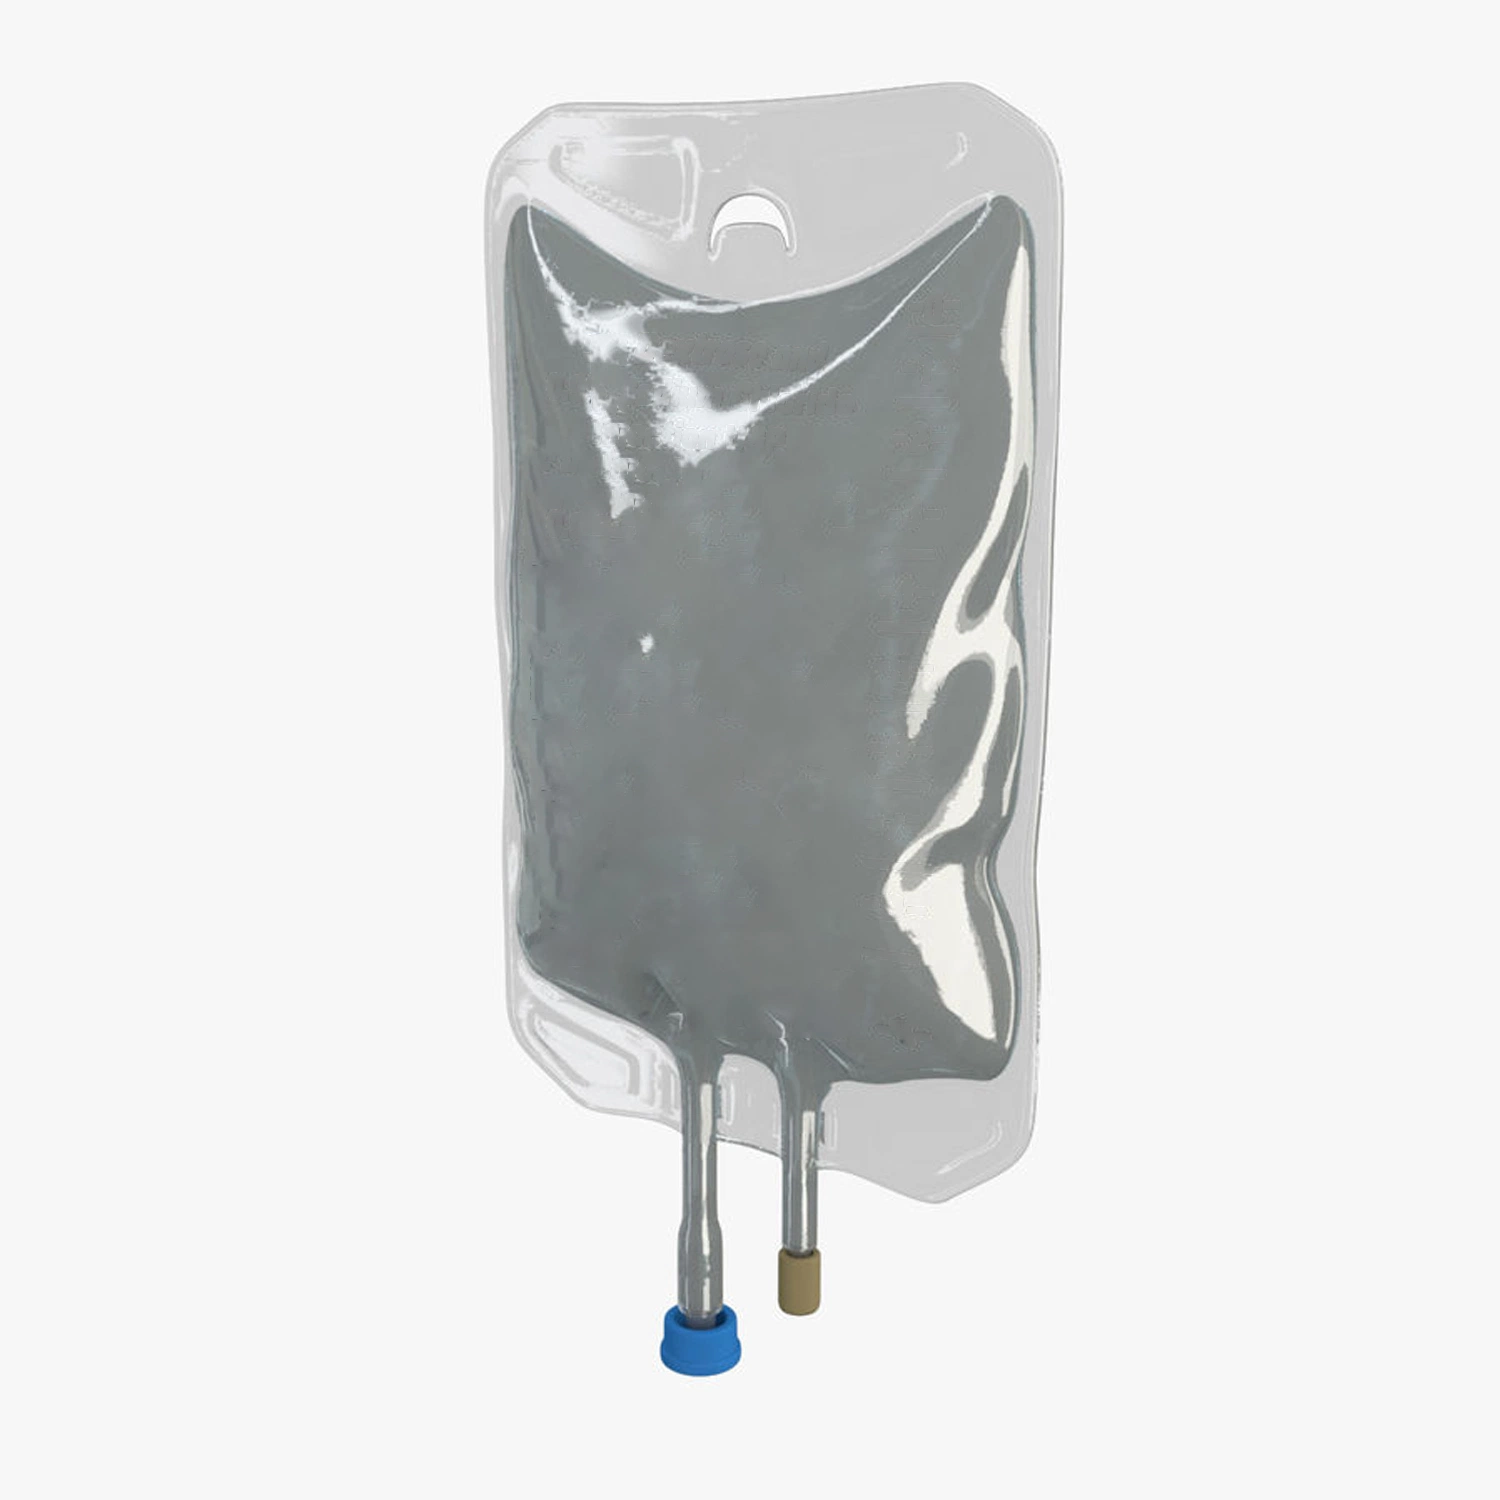 Siny Hospital Disposable Medical Supply Sterile Safety Pressure Infusion Bag with Cheap Price